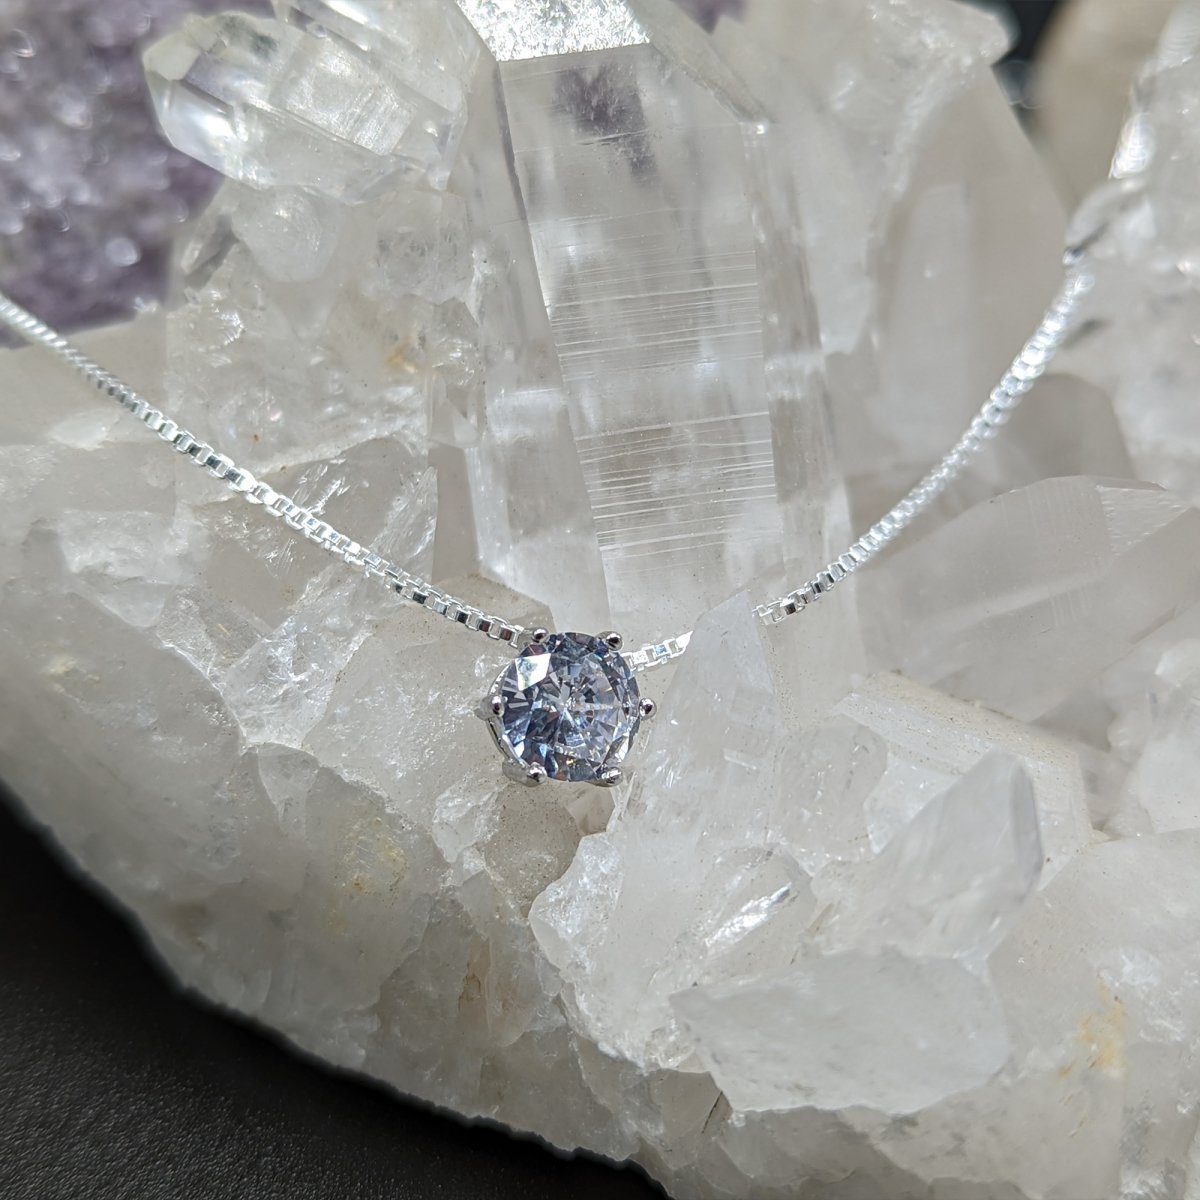 Cancer Survivor Gift, Cancer Awareness, Silver CZ Necklace - Meaningful Cards